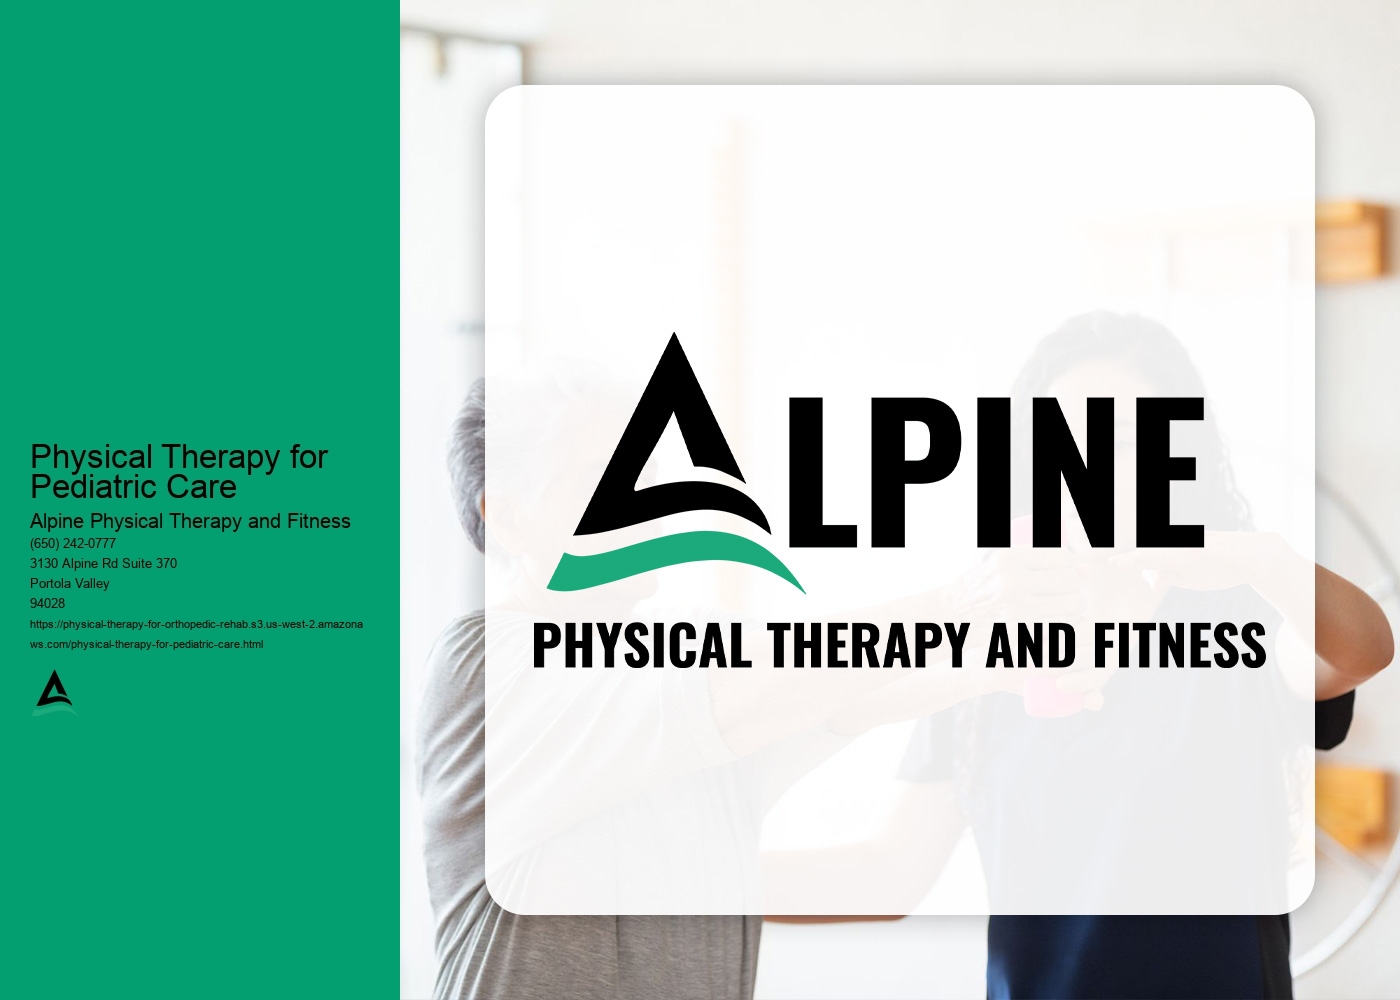 Are there any specific exercises or activities that can be done at home to supplement pediatric physical therapy?